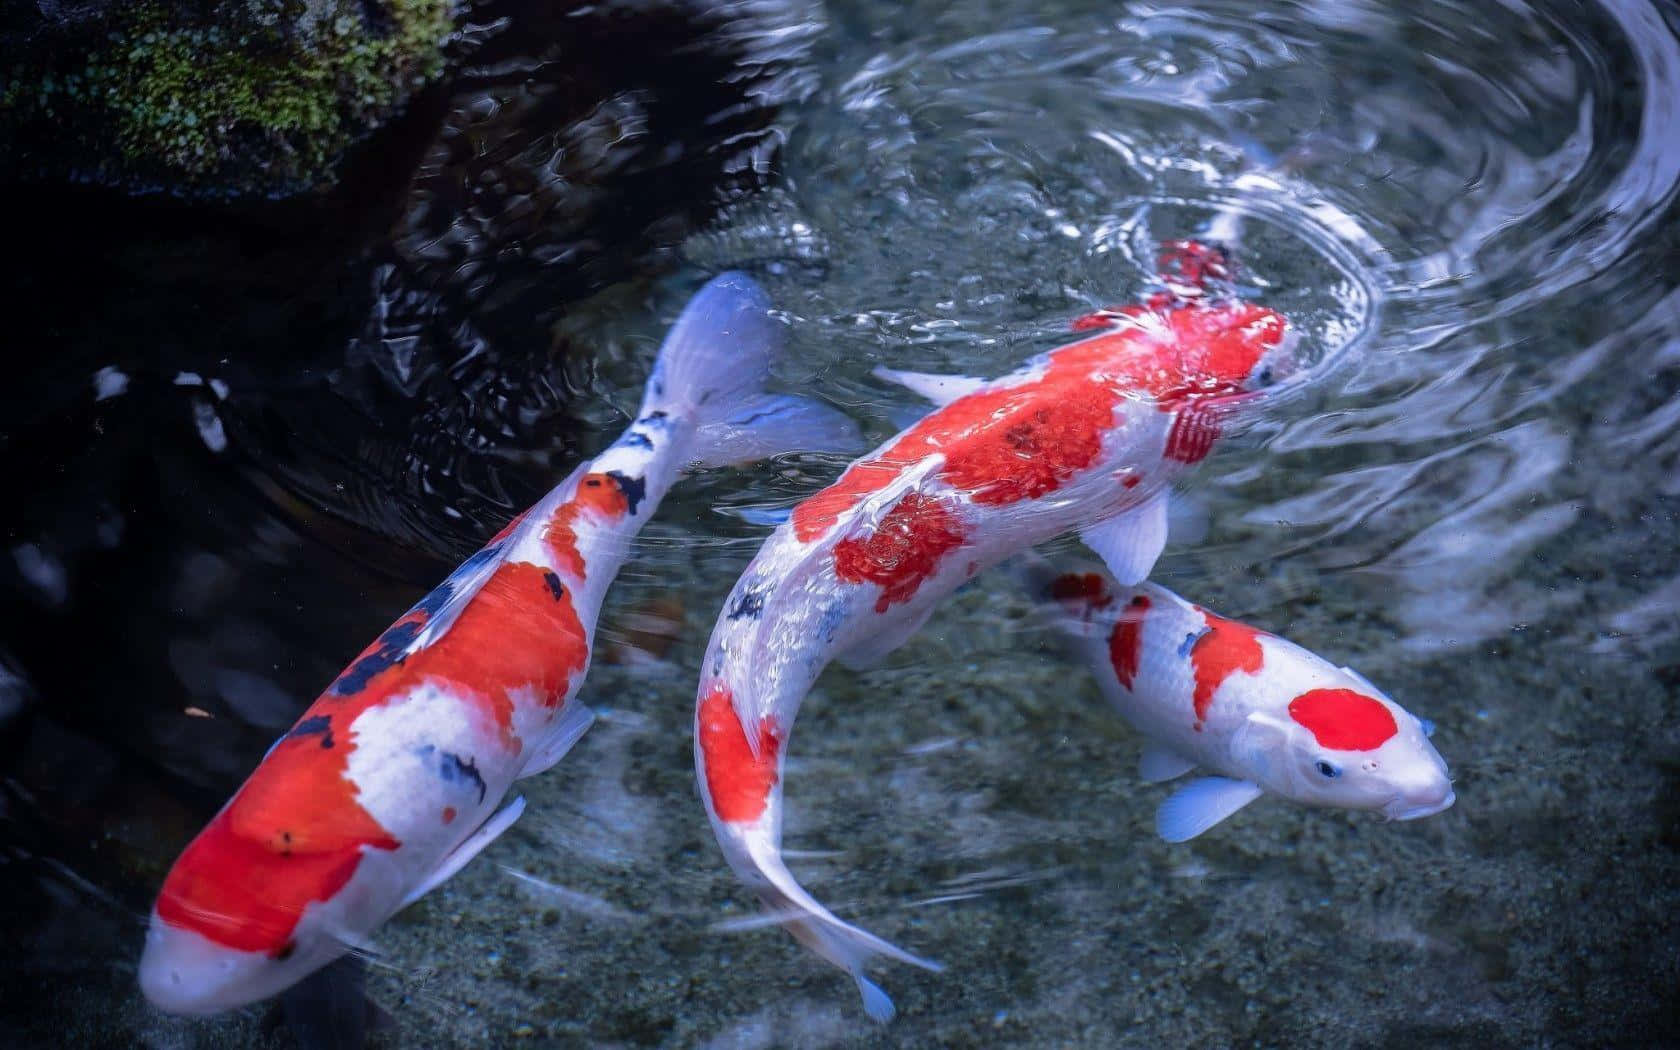 A vibrant gathering of koi fish swimming in a crystal clear pond